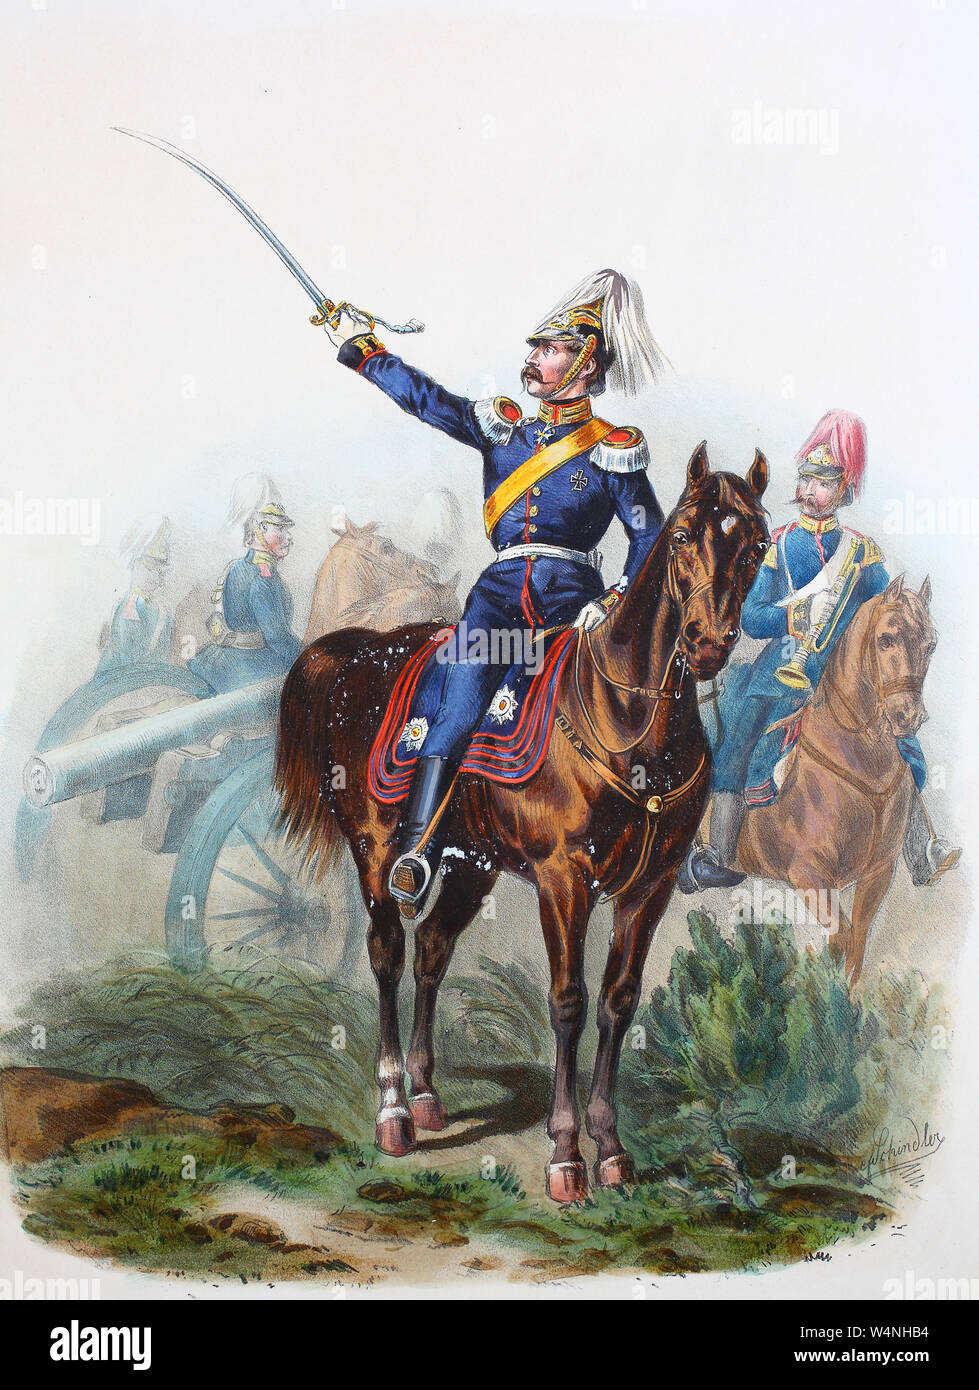 Royal Prussian Army, Guards Corps, Preußens Heer, preussische Garde, Garde Feld Artillerie Regiment, Corps Artillerie, Reitende Abteilung, Digital improved reproduction of an illustration from the 19th century Stock Photo